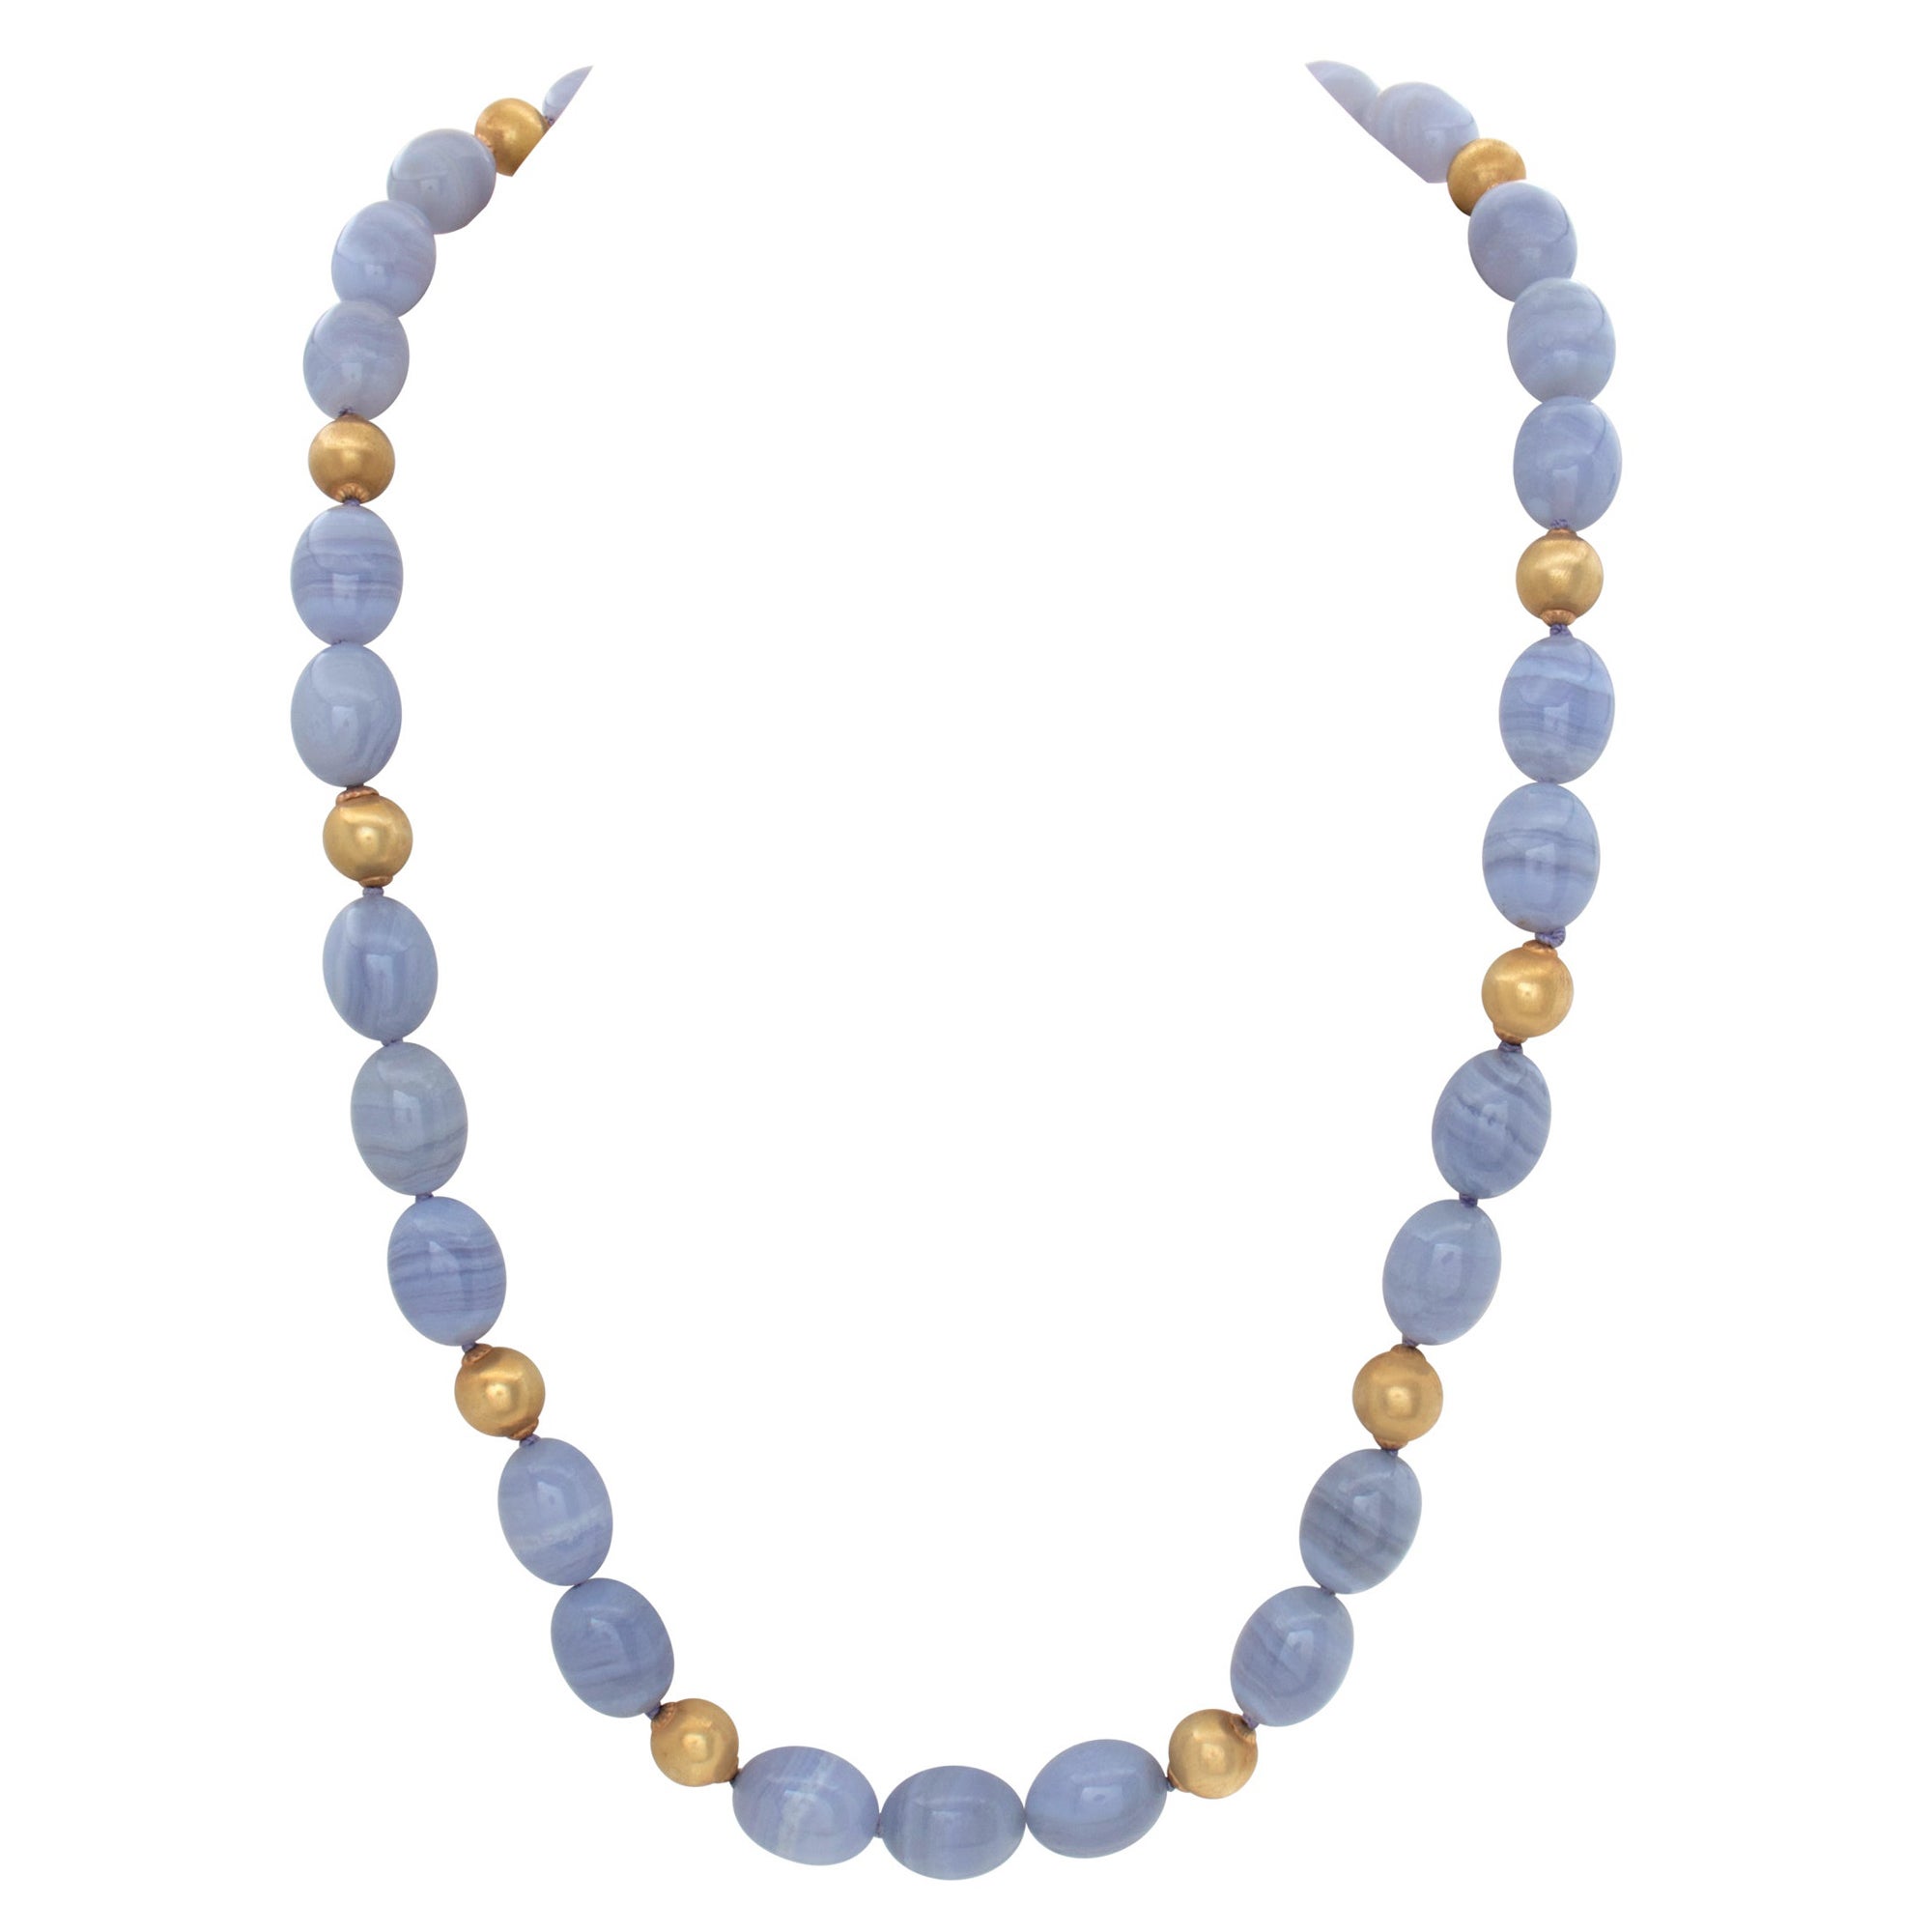 Blue lace chalcedony necklace with 18k gold beads For Sale